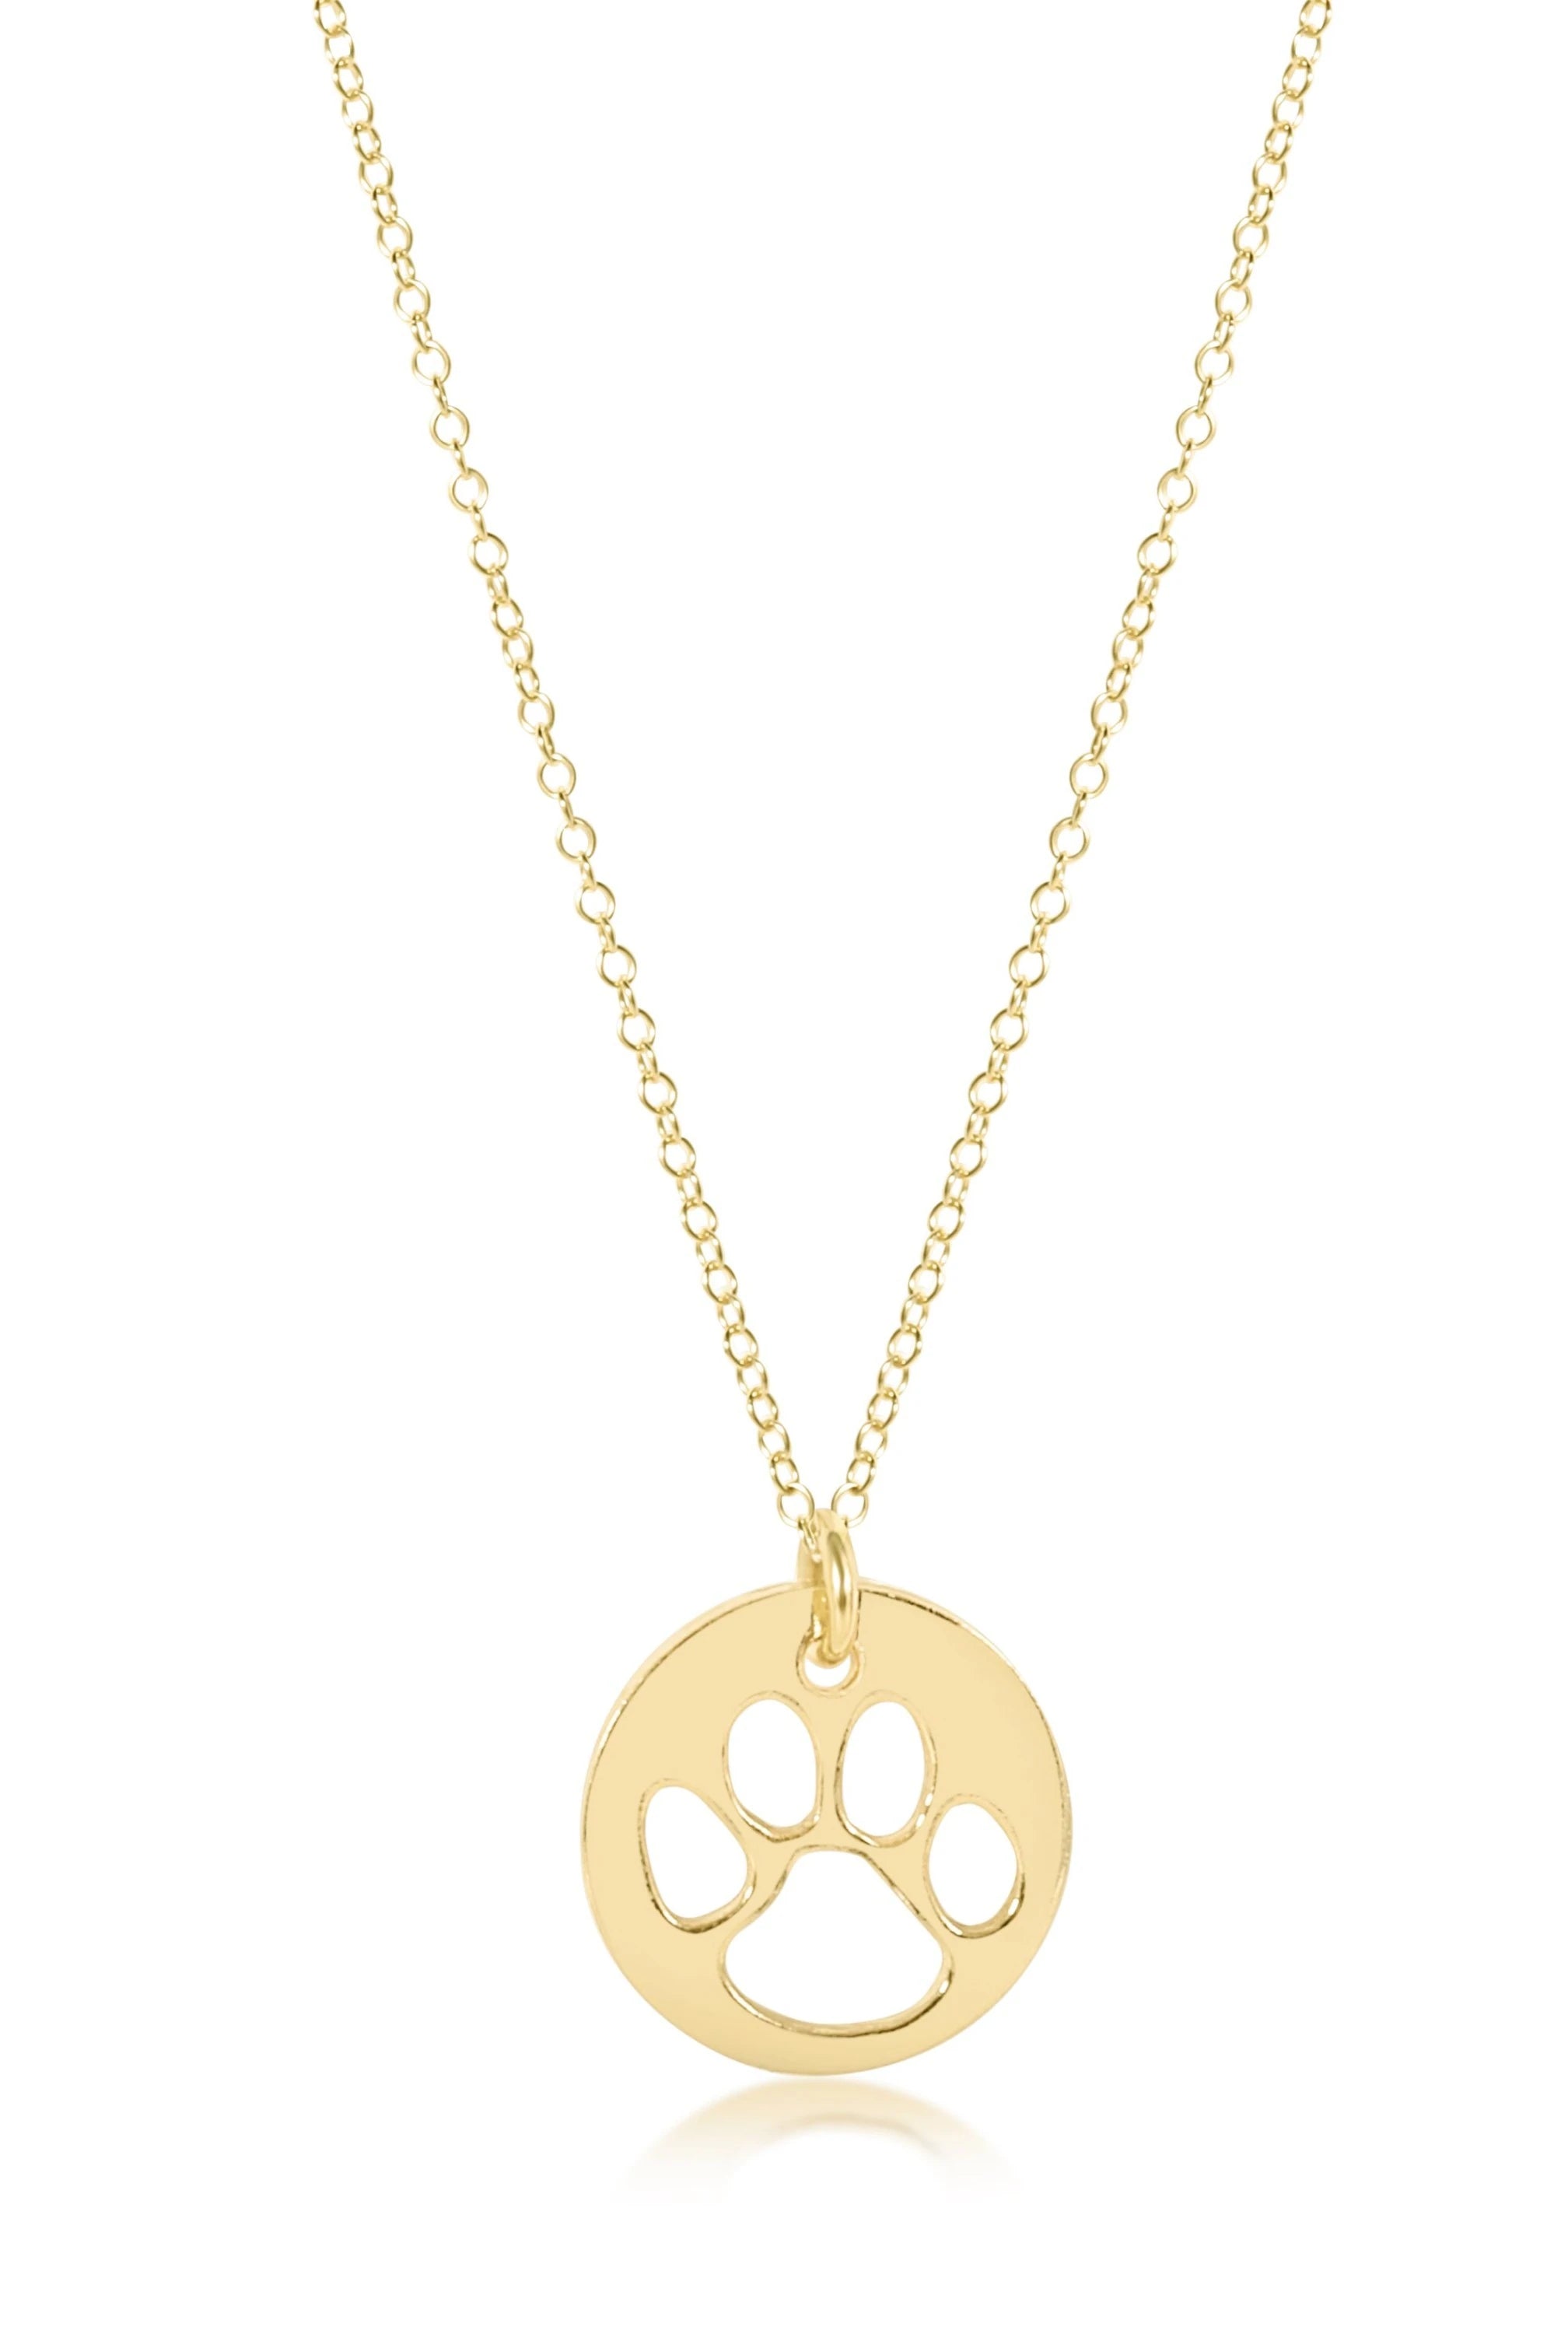 16’ Paw Print Gold Charm Necklace-Necklaces-eNewton-The Lovely Closet, Women's Fashion Boutique in Alexandria, KY